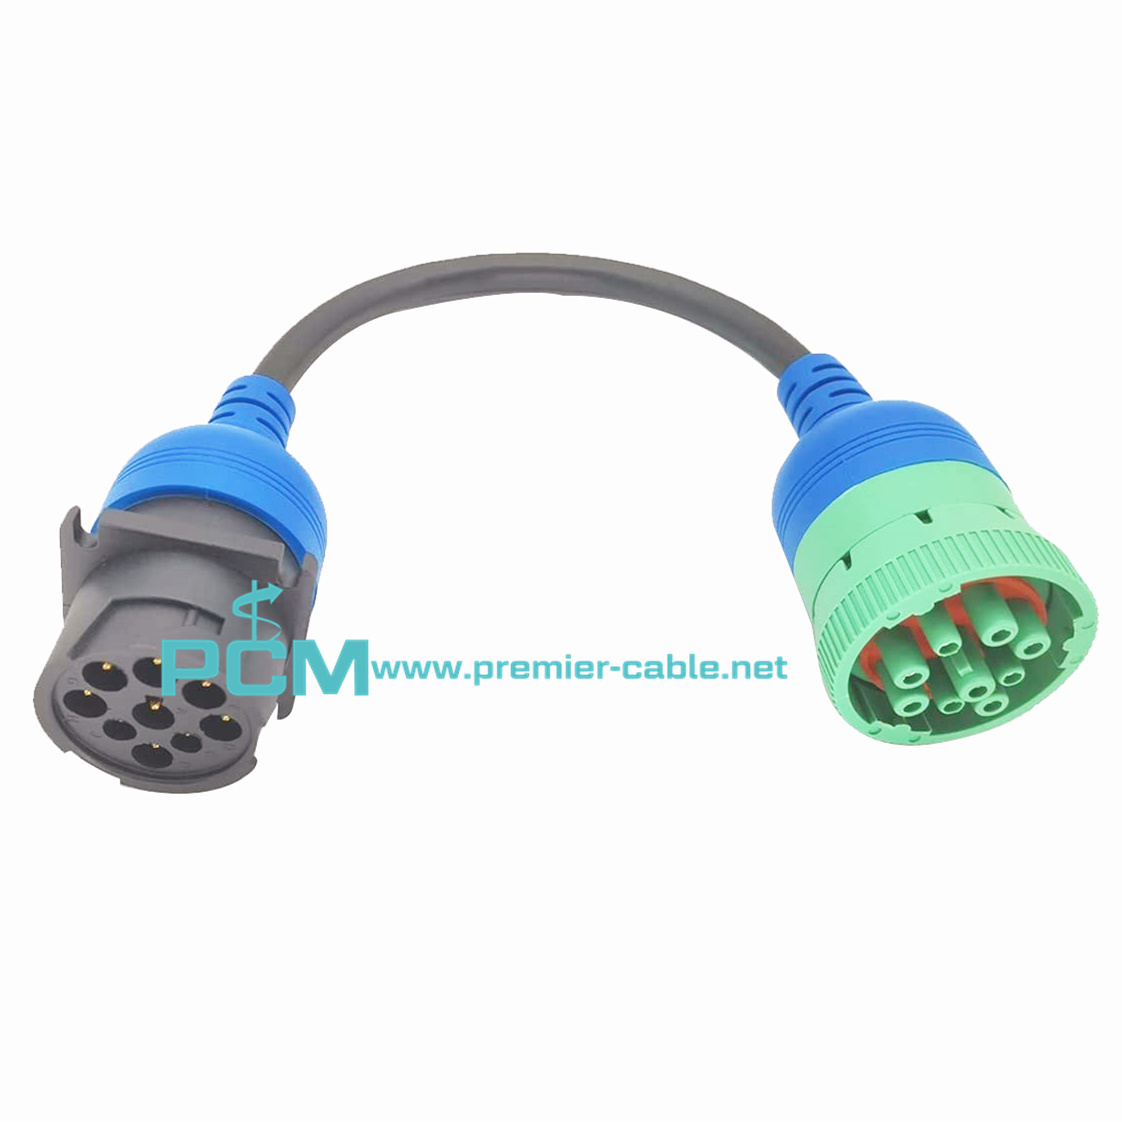 J1939 CAN3 to CAN1 Crossover Adapter Cable